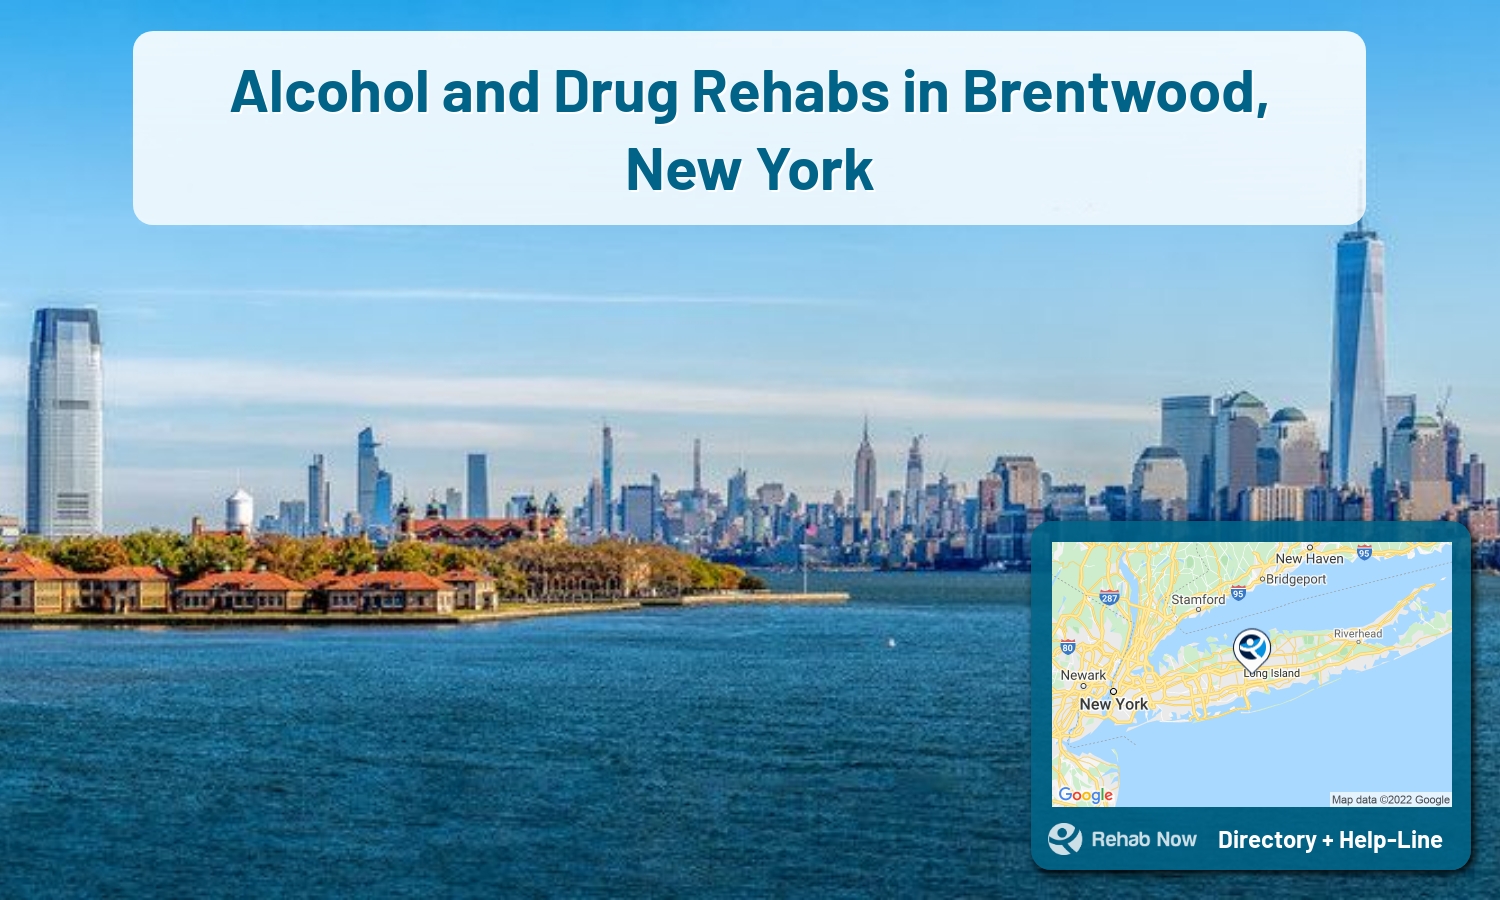 Brentwood, NY Treatment Centers. Find drug rehab in Brentwood, New York, or detox and treatment programs. Get the right help now!